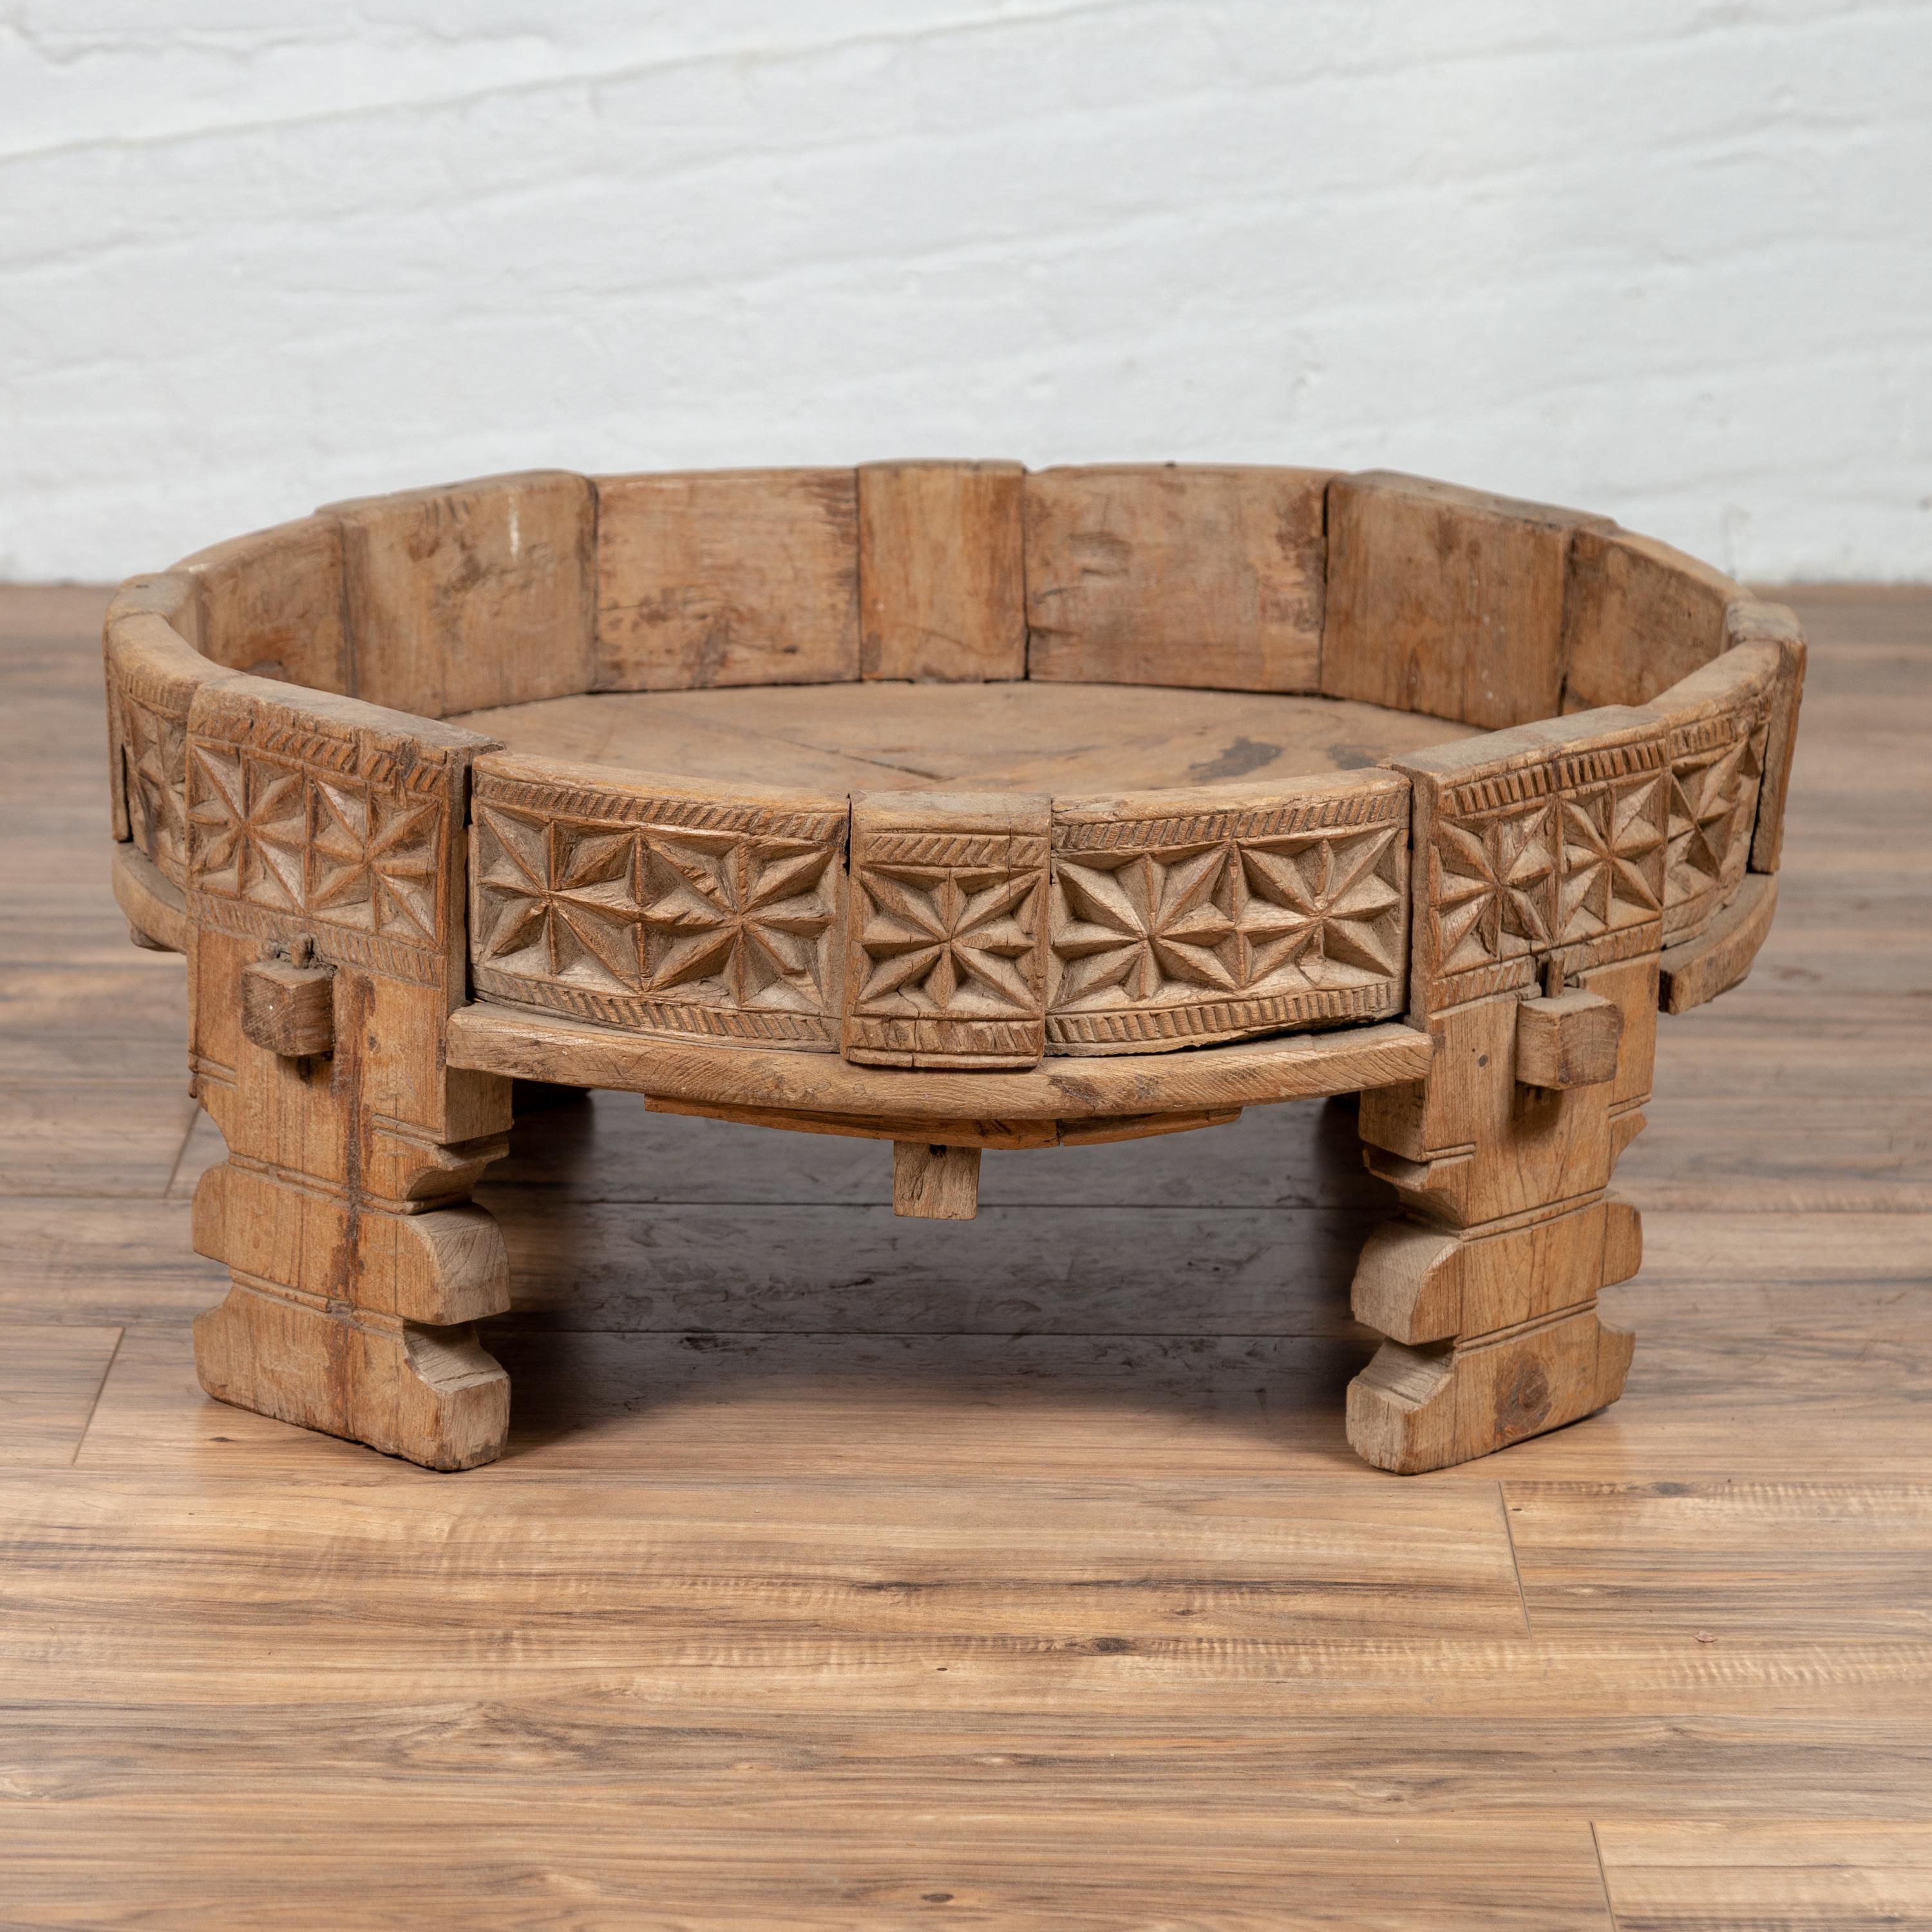 An antique Indian carved wooden grinding wheel made into a coffee table. Traditionally used to grind grains to flour before collecting for cooking, these wheels are richly decorated on their outer edge. Ours is adorned with geometrical patterns made